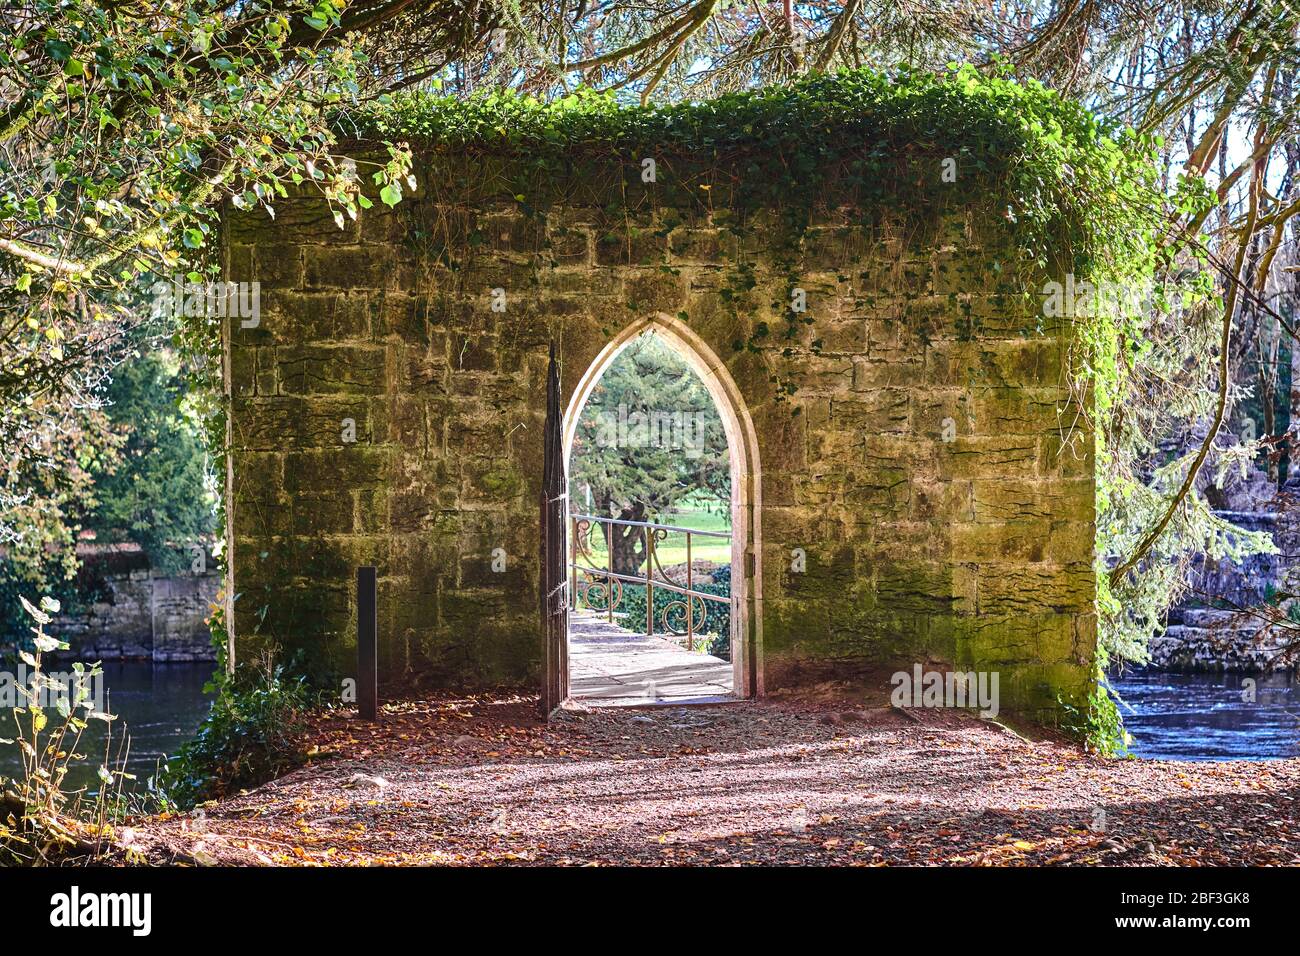 Stone archway entrance to footbridge Cong Forest Recreation area Cong, County Mayo Republic of Ireland Europe Stock Photo